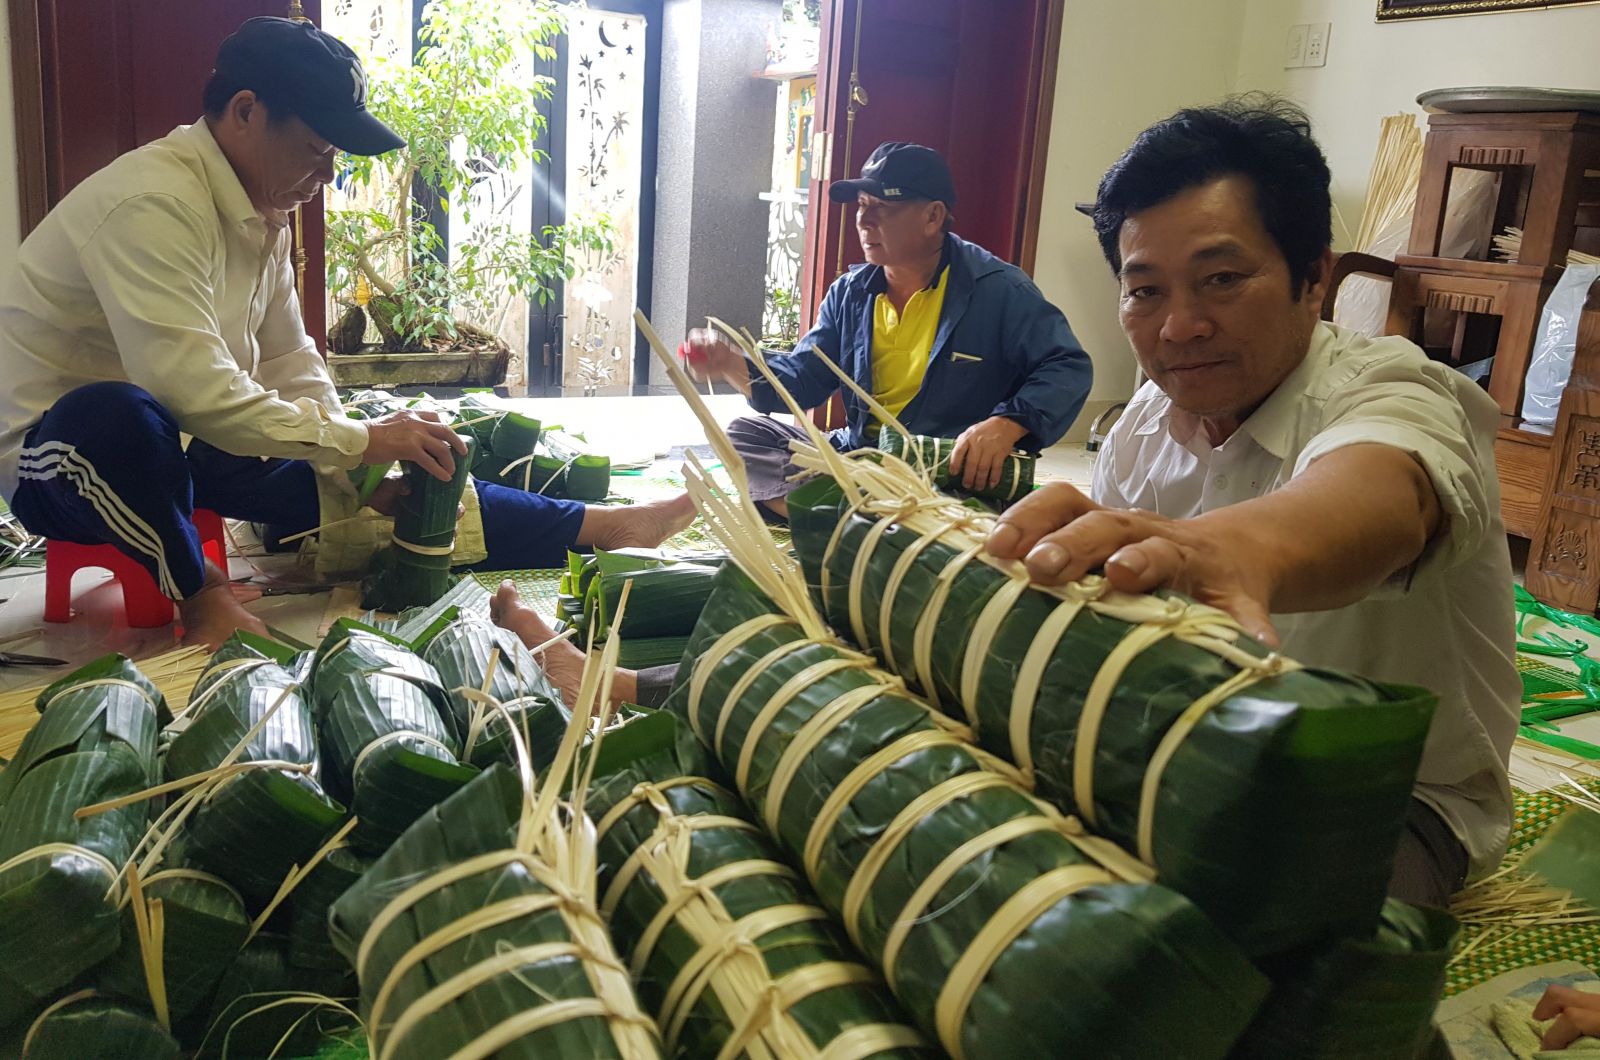 Banh Tet made by people is Chuon village are wrapped according to the request of customers from far away